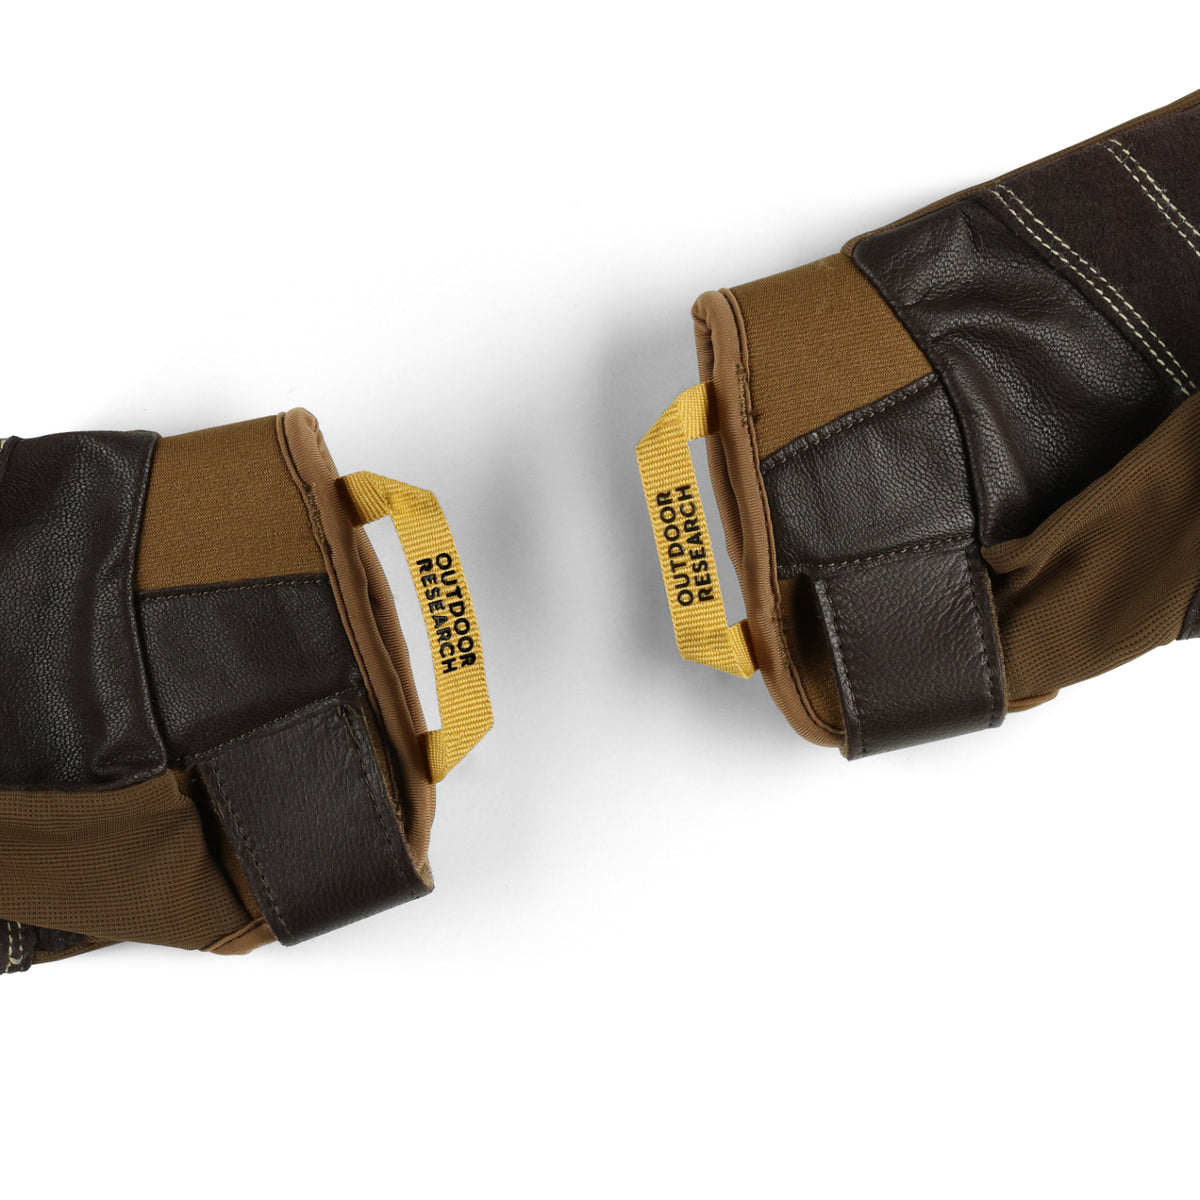 Outdoor Research Fossil Rock Belay Gloves